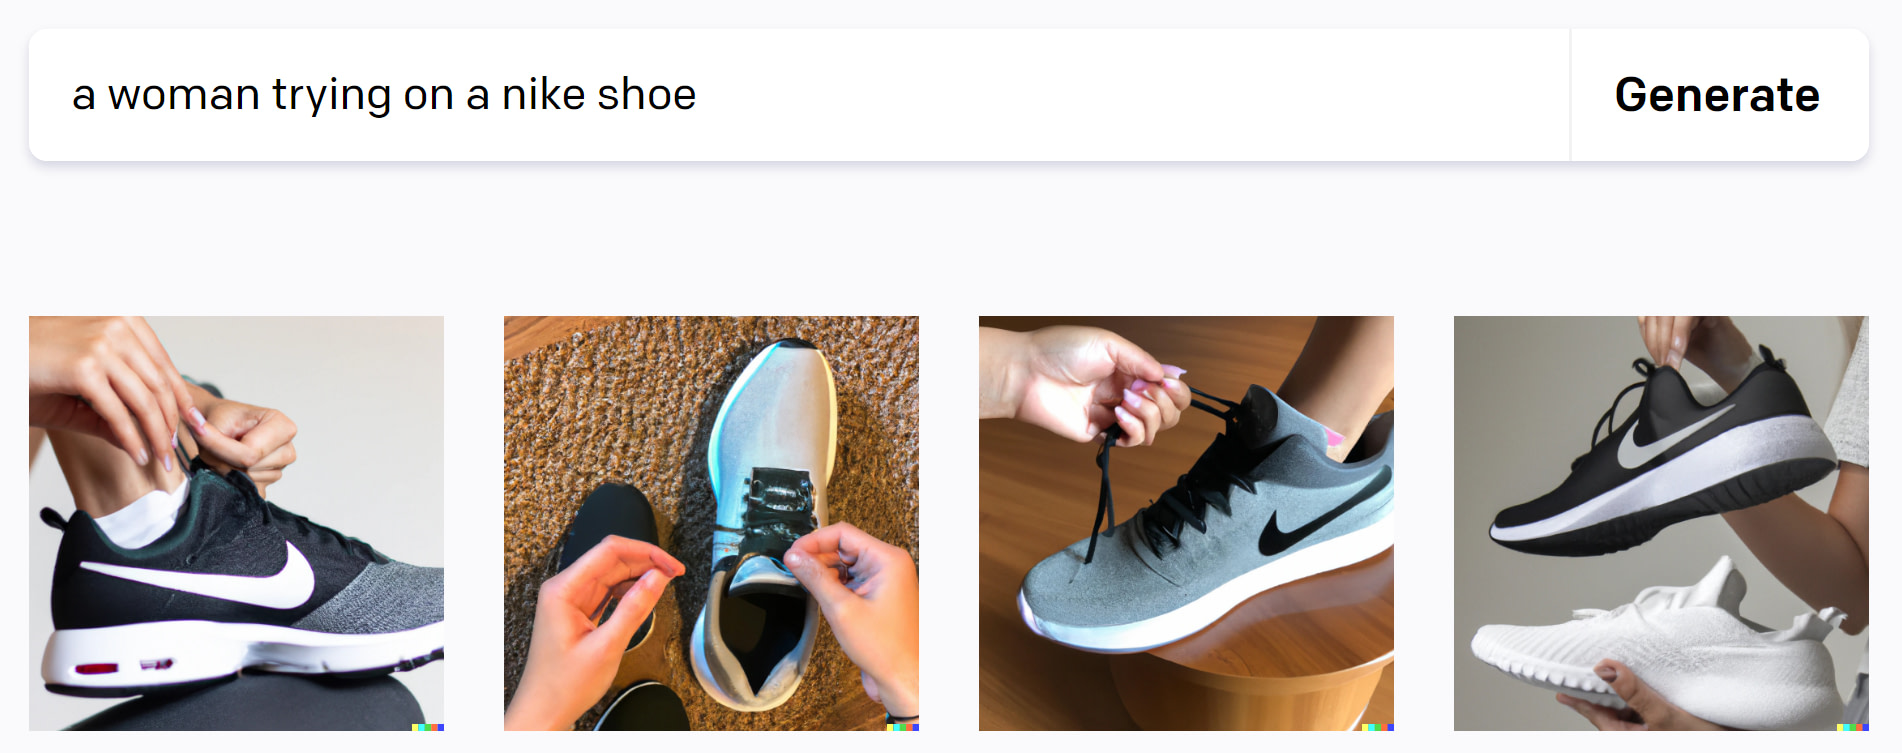 AI web design tools can be used to generate graphics such as a woman trying on a Nike shoe (as shown here).